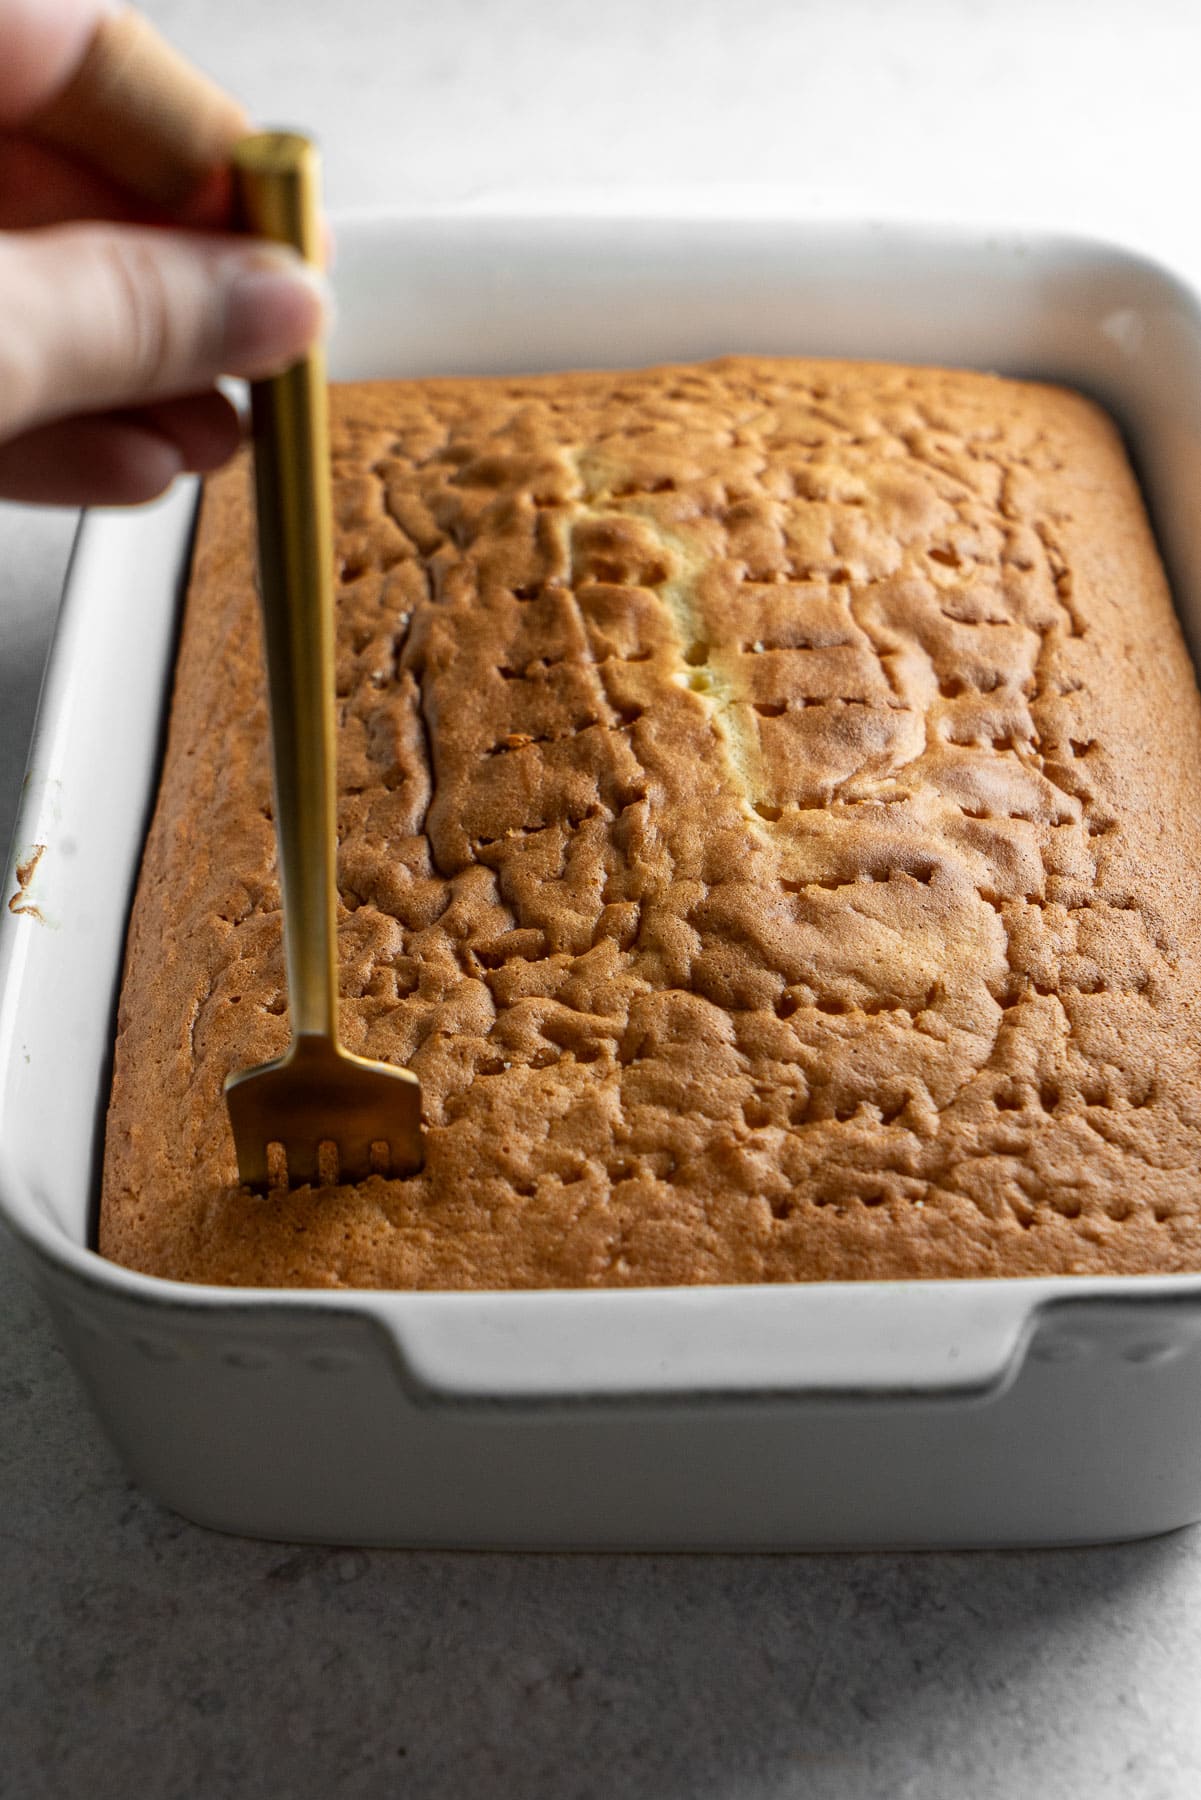 A fork poking holes into a baked cake in a baking dish.